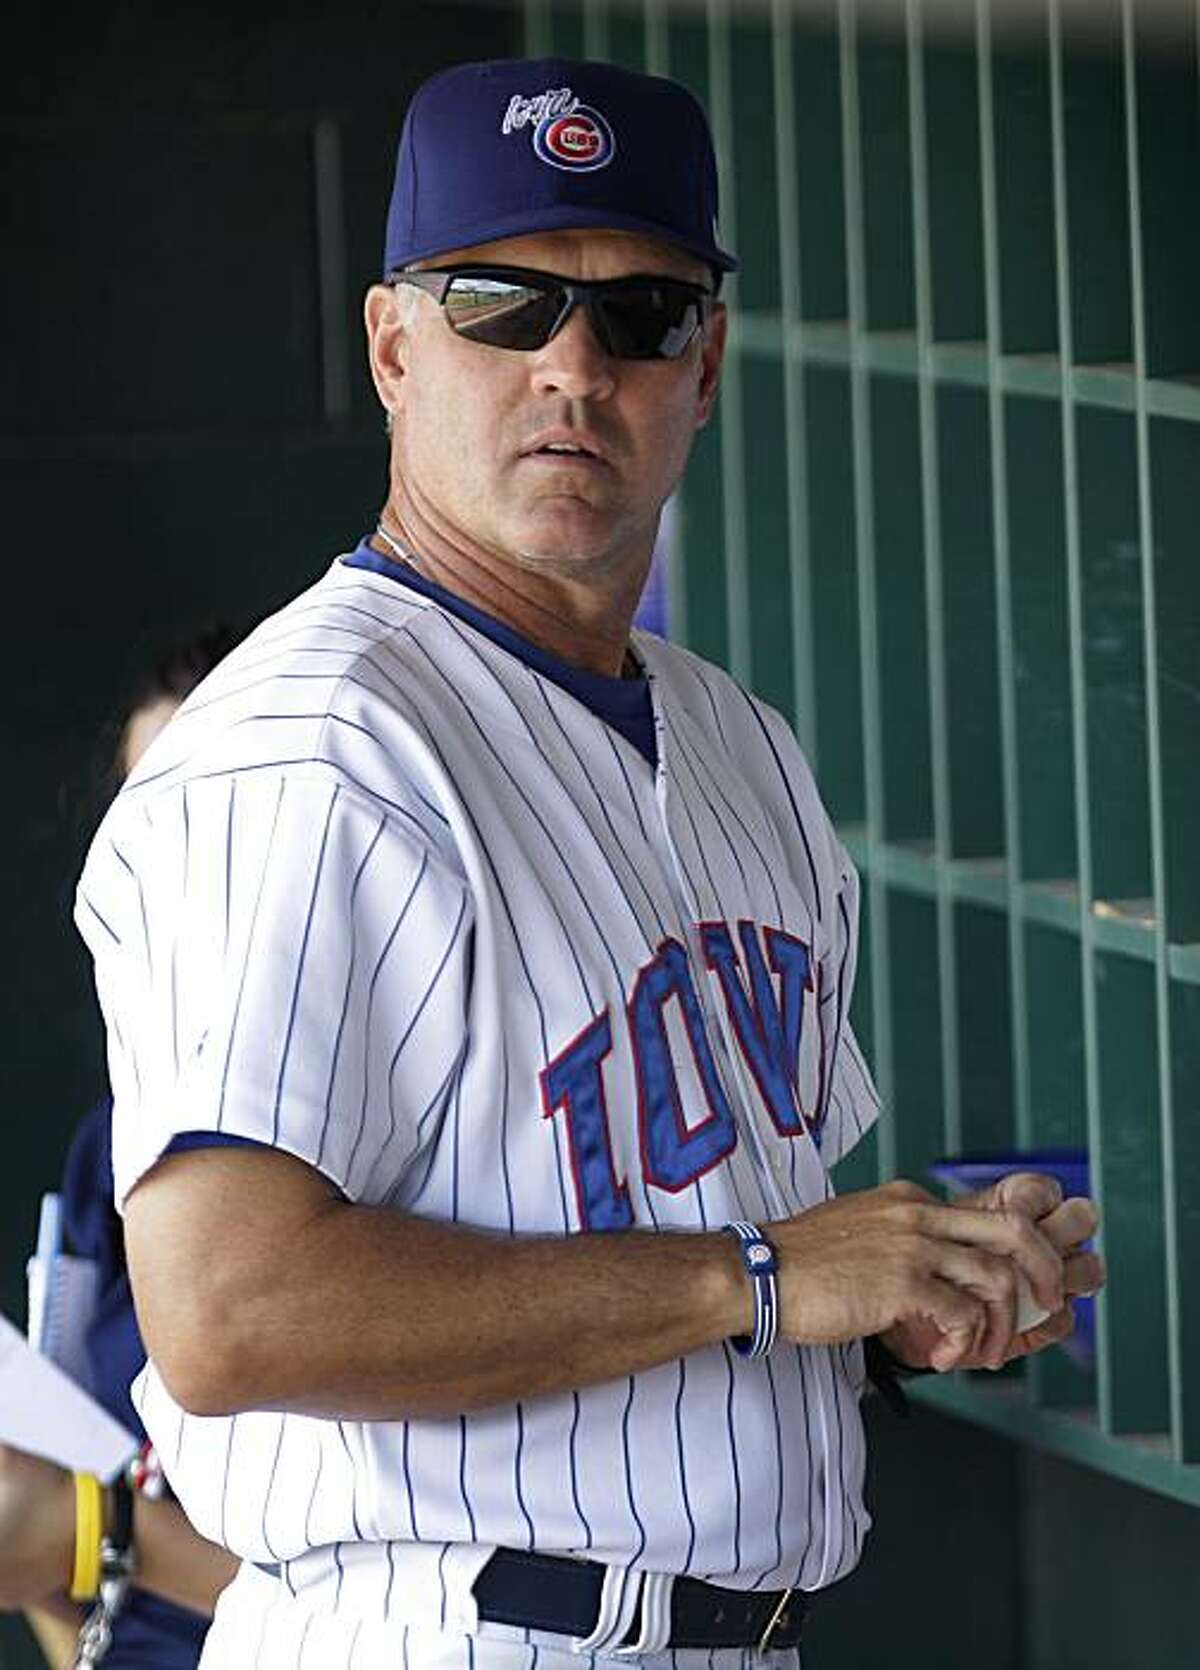 FILE - In this July 20, 2010, file photo, Iowa Cubs manager Ryne Sandberg stands in the dugout before his baseball team's game against the Oklahoma City Redhawks in Des Moines, Iowa. The Philadelphia Phillies have hired Sandberg to manager their Triple-Aaffiliate, the Lehigh Valley IronPigs.